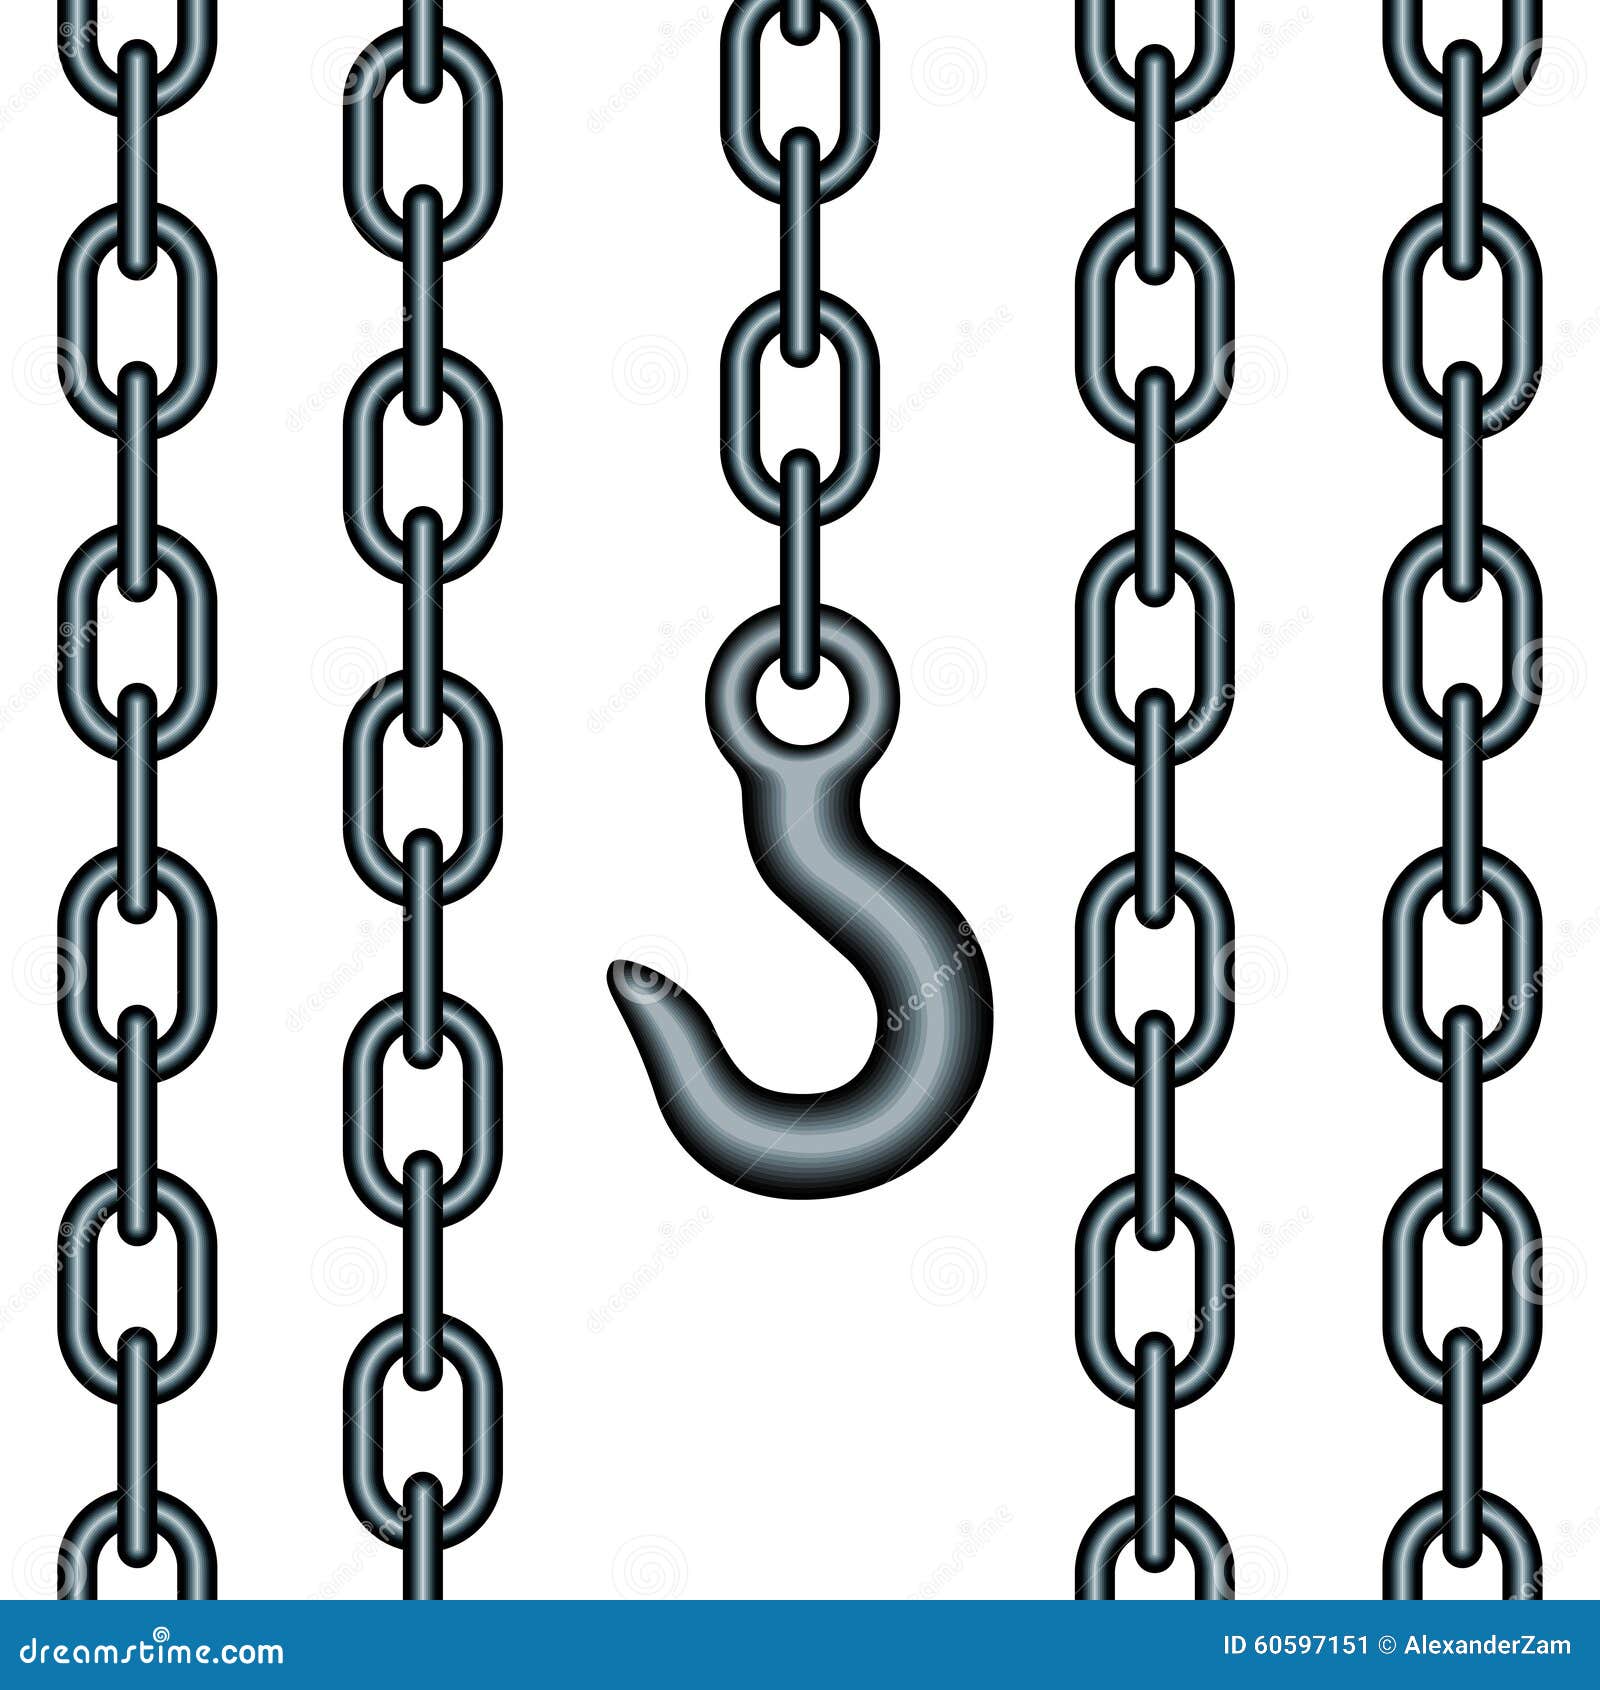 Hook and chains stock illustration. Illustration of equipment - 60597151